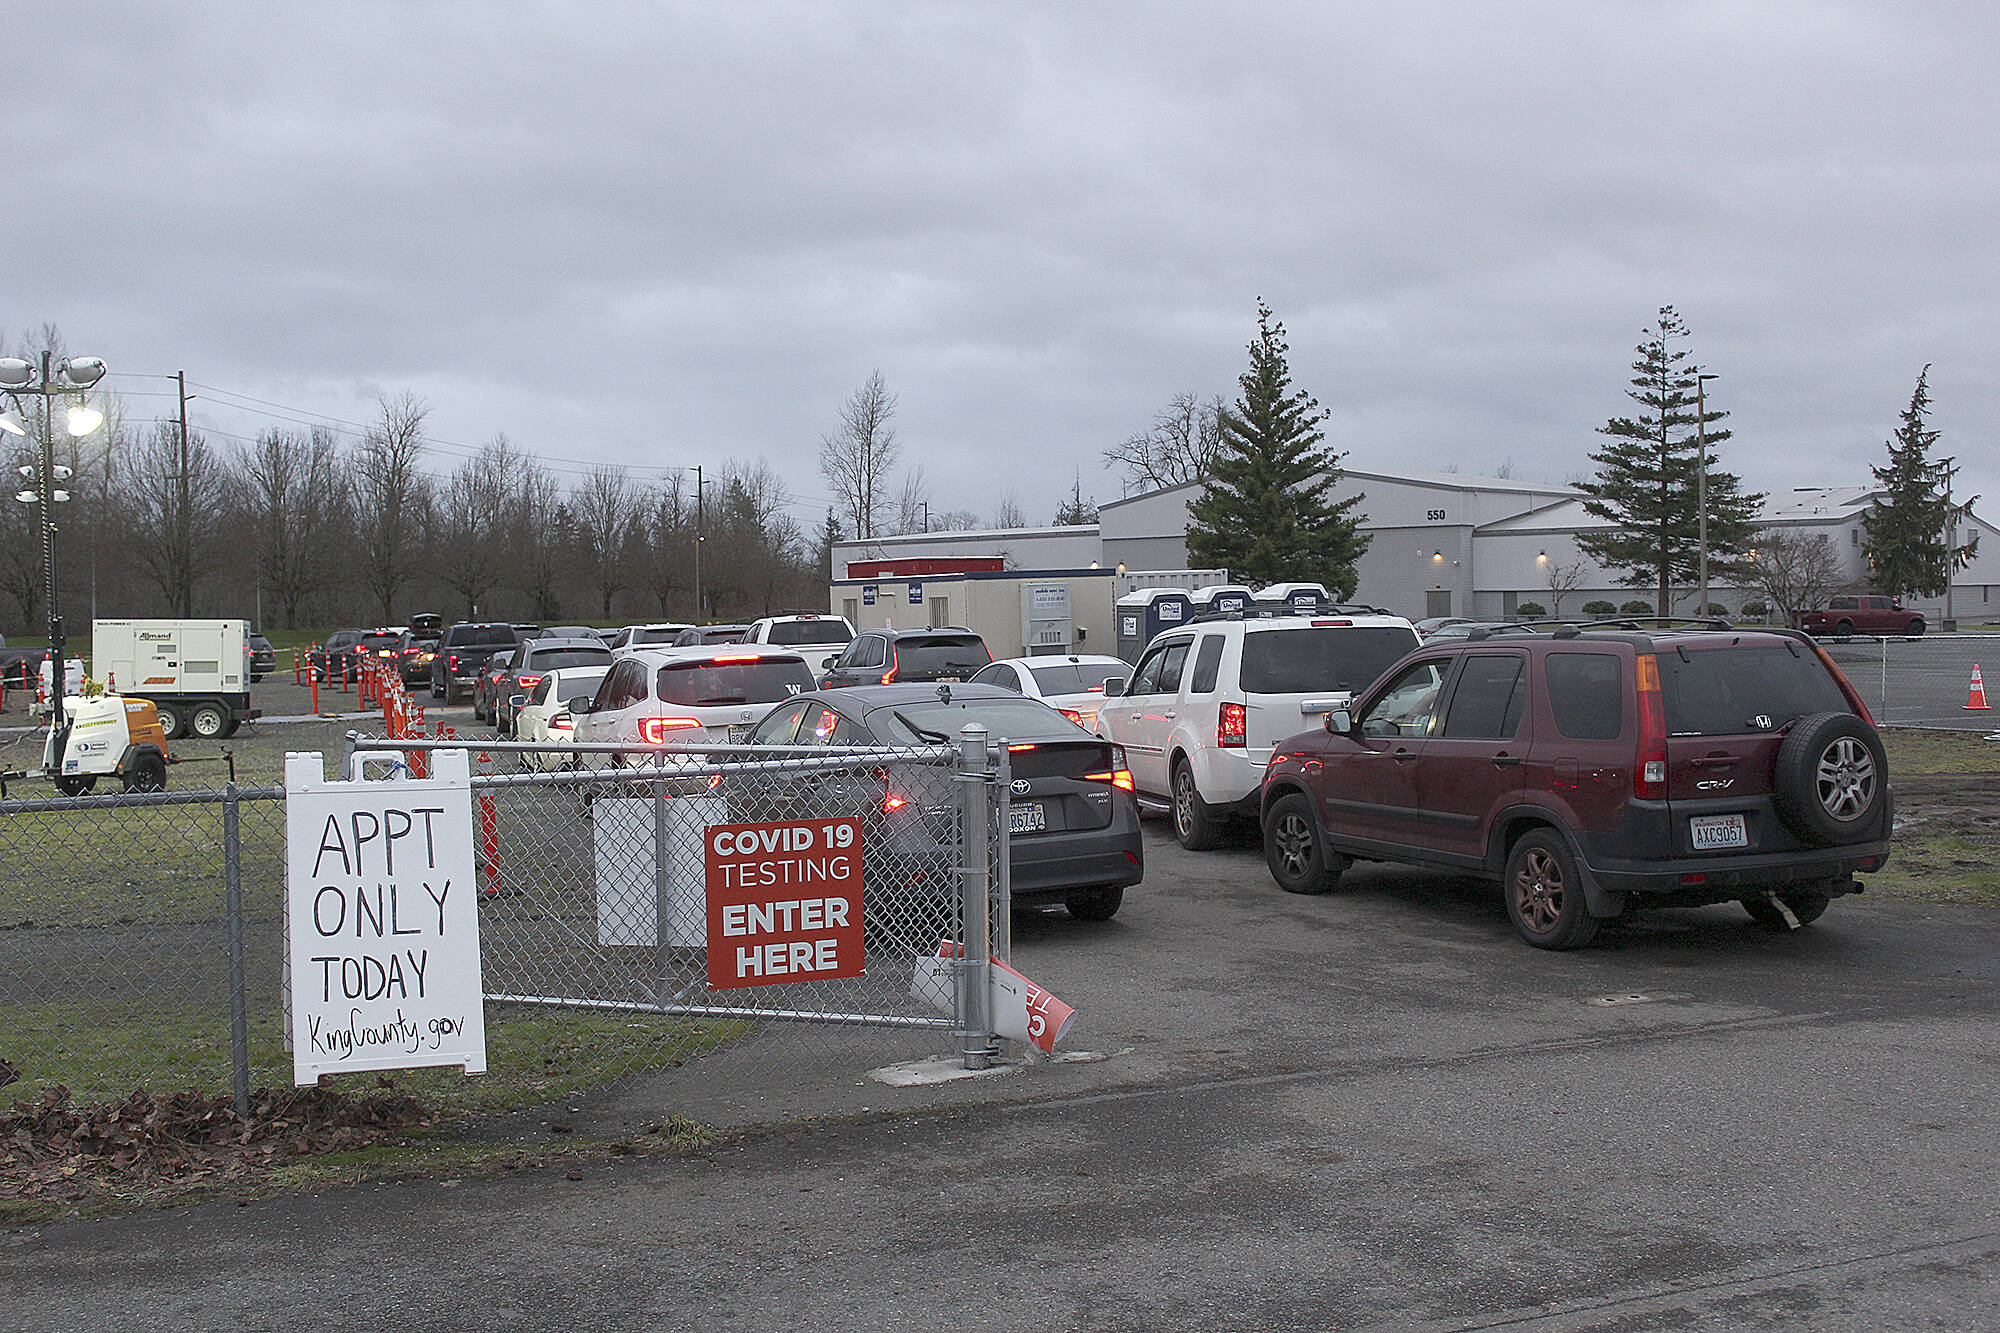 If you are looking to get a quick COVID test in Enumclaw, you may be out of luck — the testing site has recently been swamped with visitors (one Enumclaw police officer on scene said the line sometimes stretches from the tent at 550 Semanski Street S., down McDougall Ave., and onto 244th Ave. SE, roughly a half mile away), and "staffing challenges" at the site are further exacerbating wait times, King County has said. The test site now requires visitors to make an appointment online at www.solvhealth.com/book-online/pYWRj0 — however, as of Jan. 10, it appears there were virtually no appointments available through Jan. 14. The testing site is open Mondays, Tuesdays, Thursdays and Fridays from 9:30 a.m. to 7 p.m. 
In lieu of going to the testing site, you may be able to have a free COVID testing kit sent to your home, courtesy of the Greater Seattle Coronavirus Assessment Network. To enroll in the program, head to www.scanpublichealth.org/screener; kits typically arrive 24 hours after enrolling. The program warns it has a limited number of tests each day. 
Photos by Ray Miller-Still